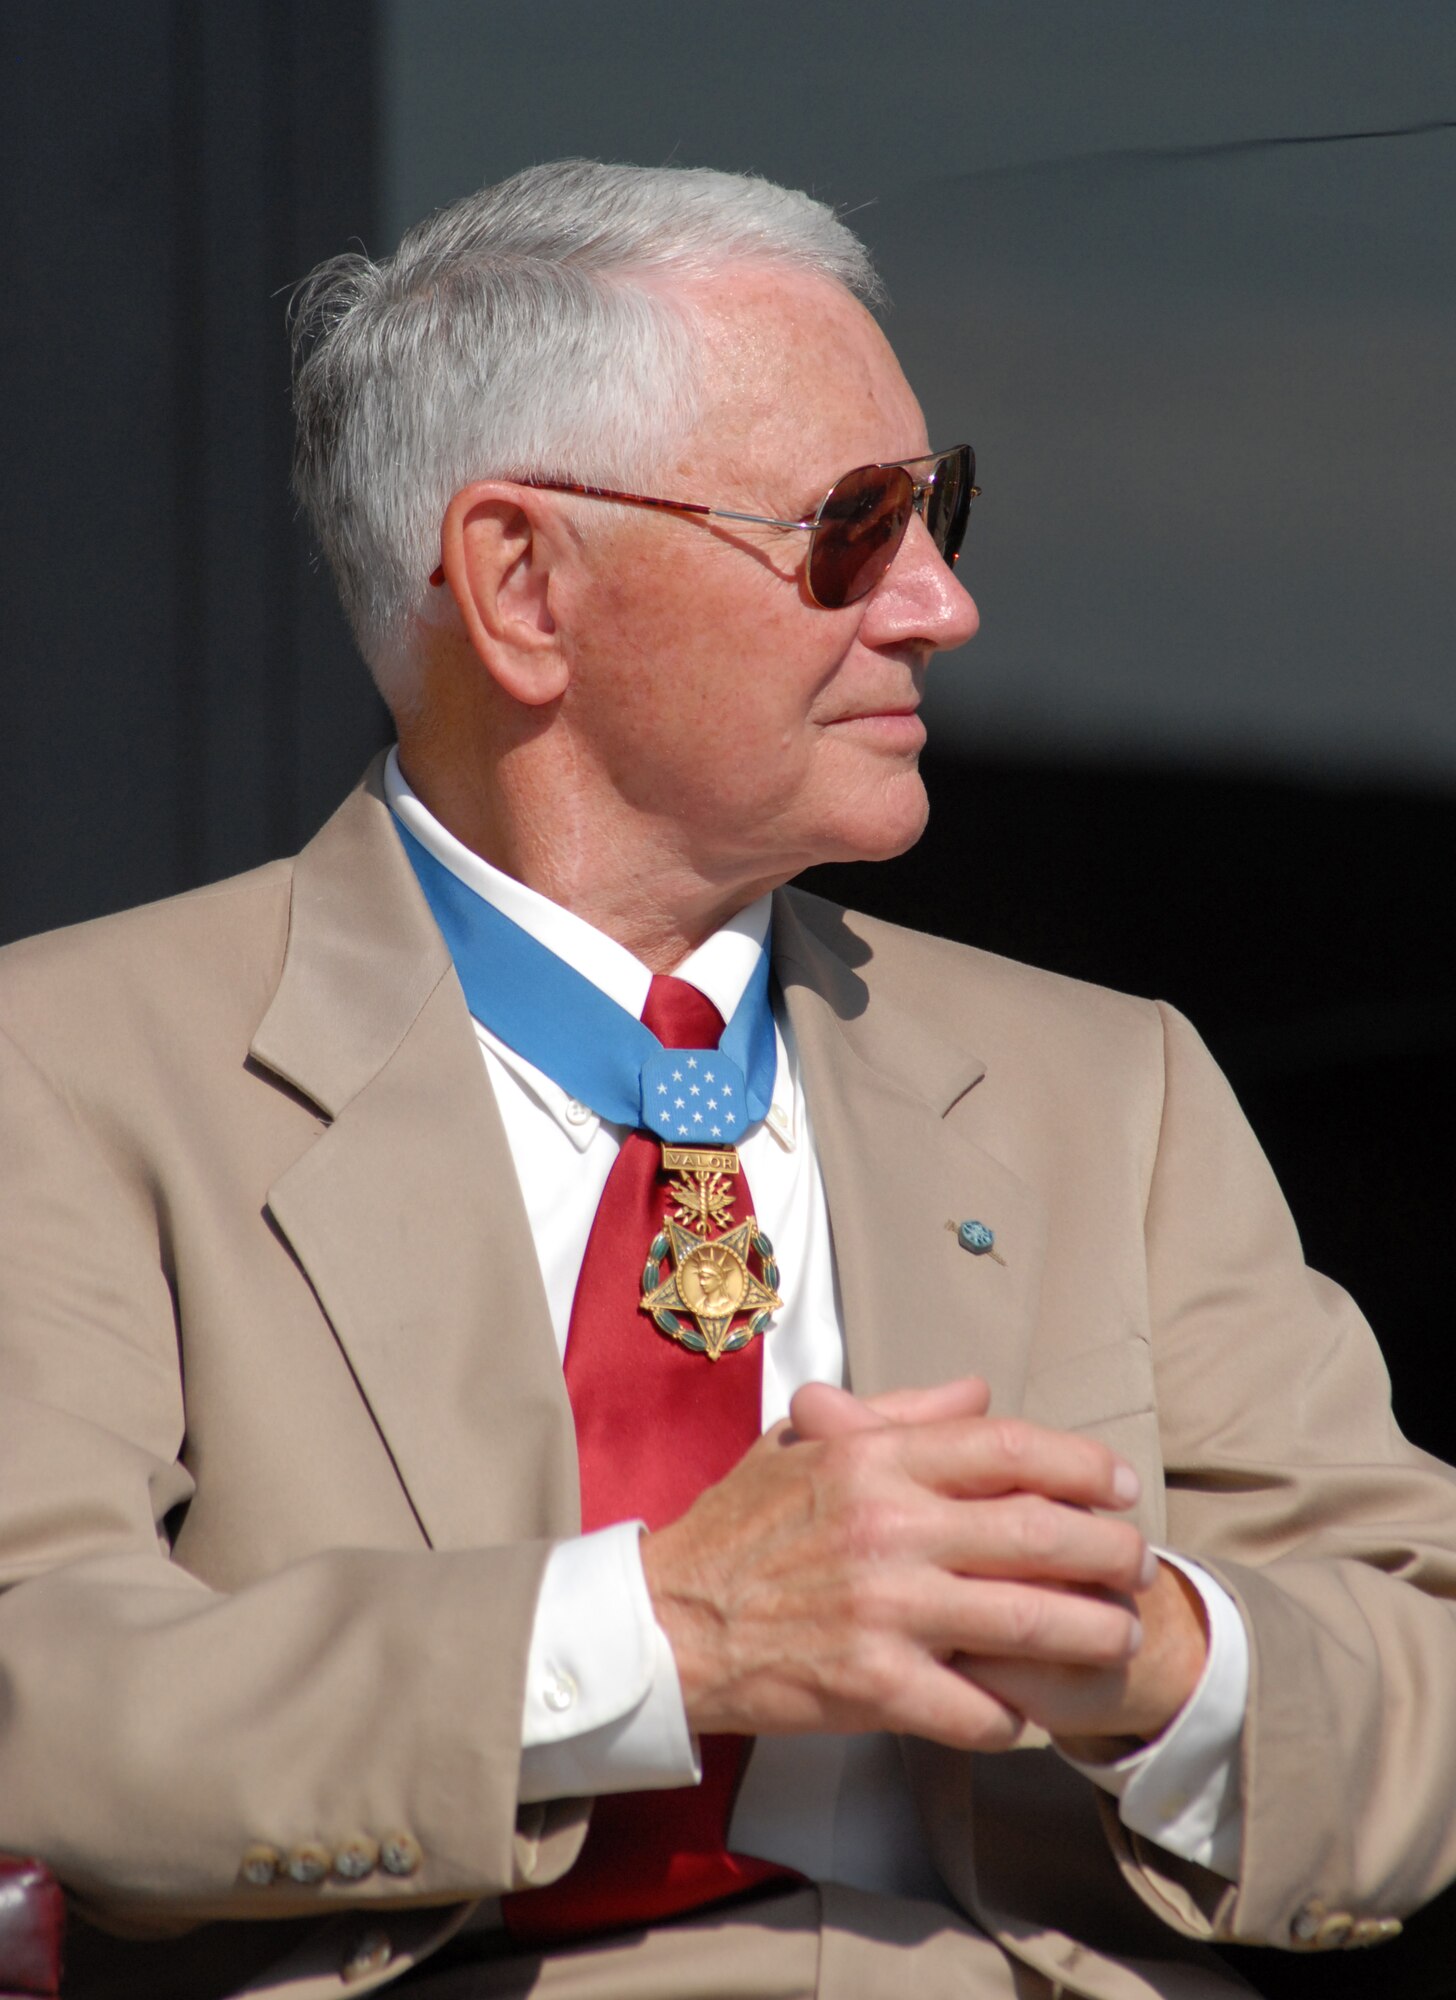 Medal of Honor recipient Col Leo Thorsness waits to speak during a dedication ceremony of two buildings in honor of himself and fellow Medal of Honor recipient Col.  George E. “Bud” Day May 7 on Goodfellow AFB, Texas. (U.S. Air Force photo/Master Sgt. Randy Mallard)